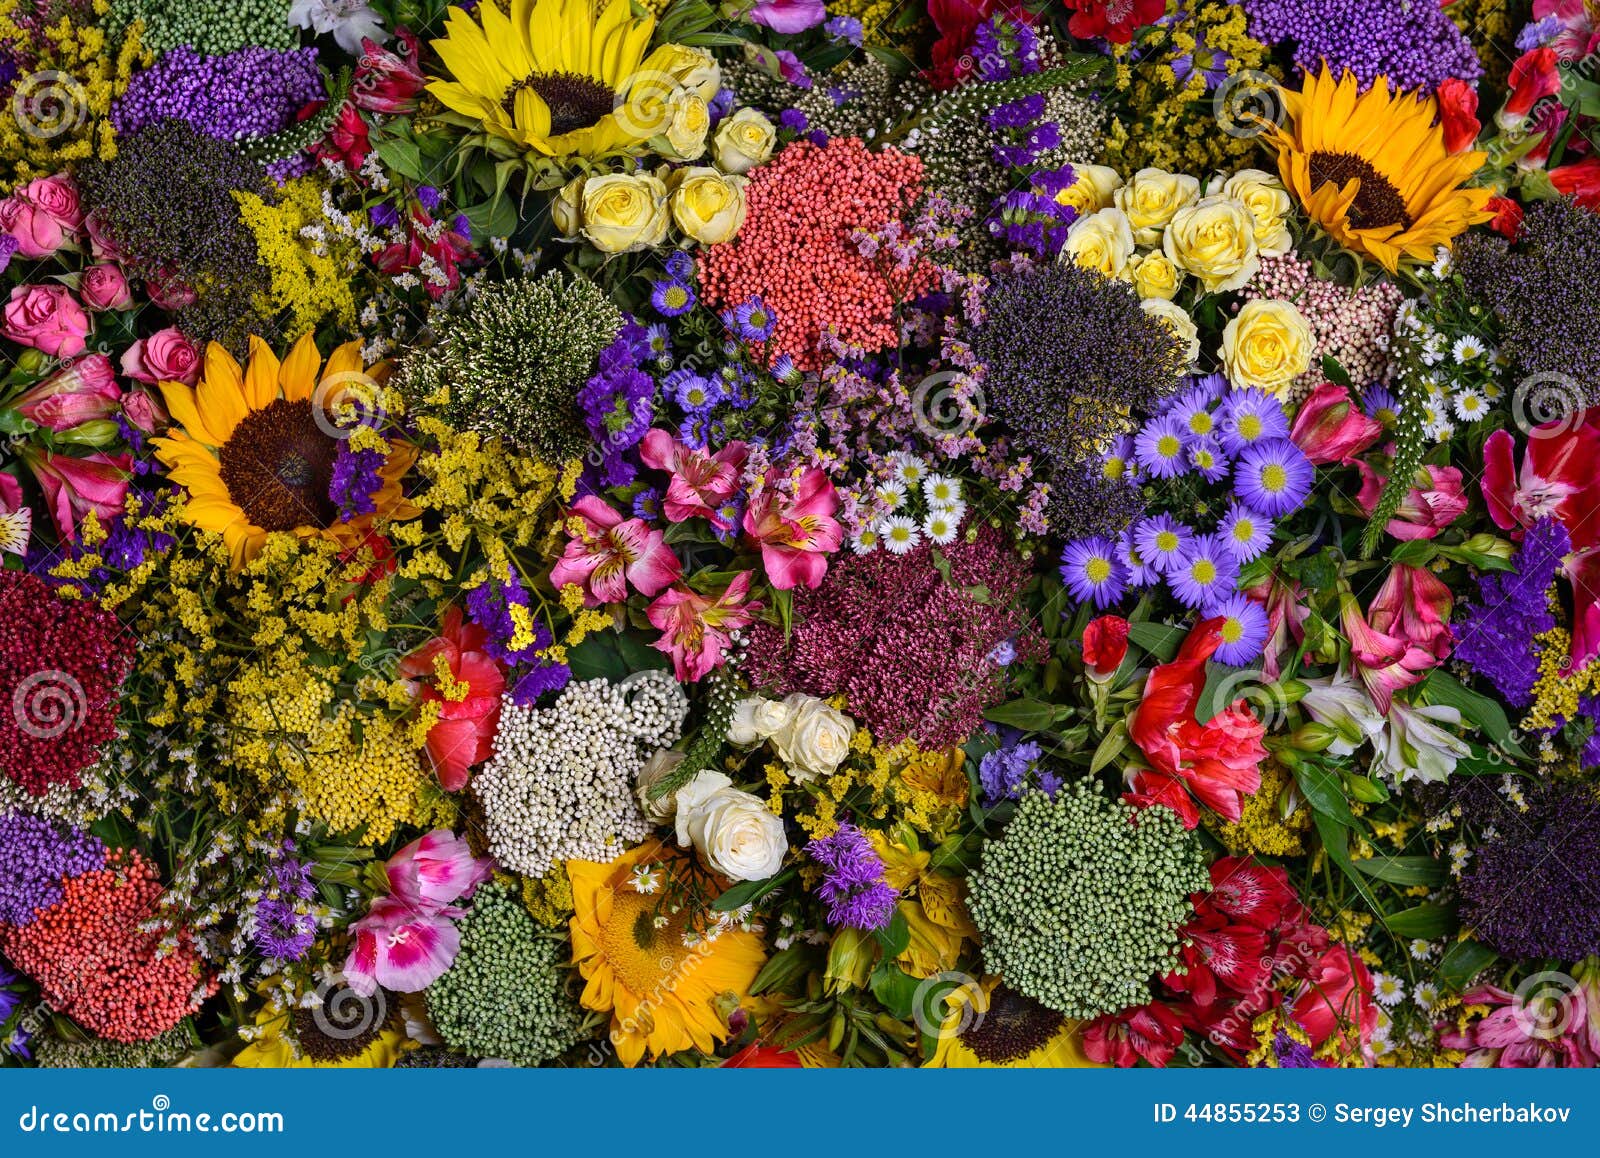 Colorful Flowers Stock Photo - Image: 44855253